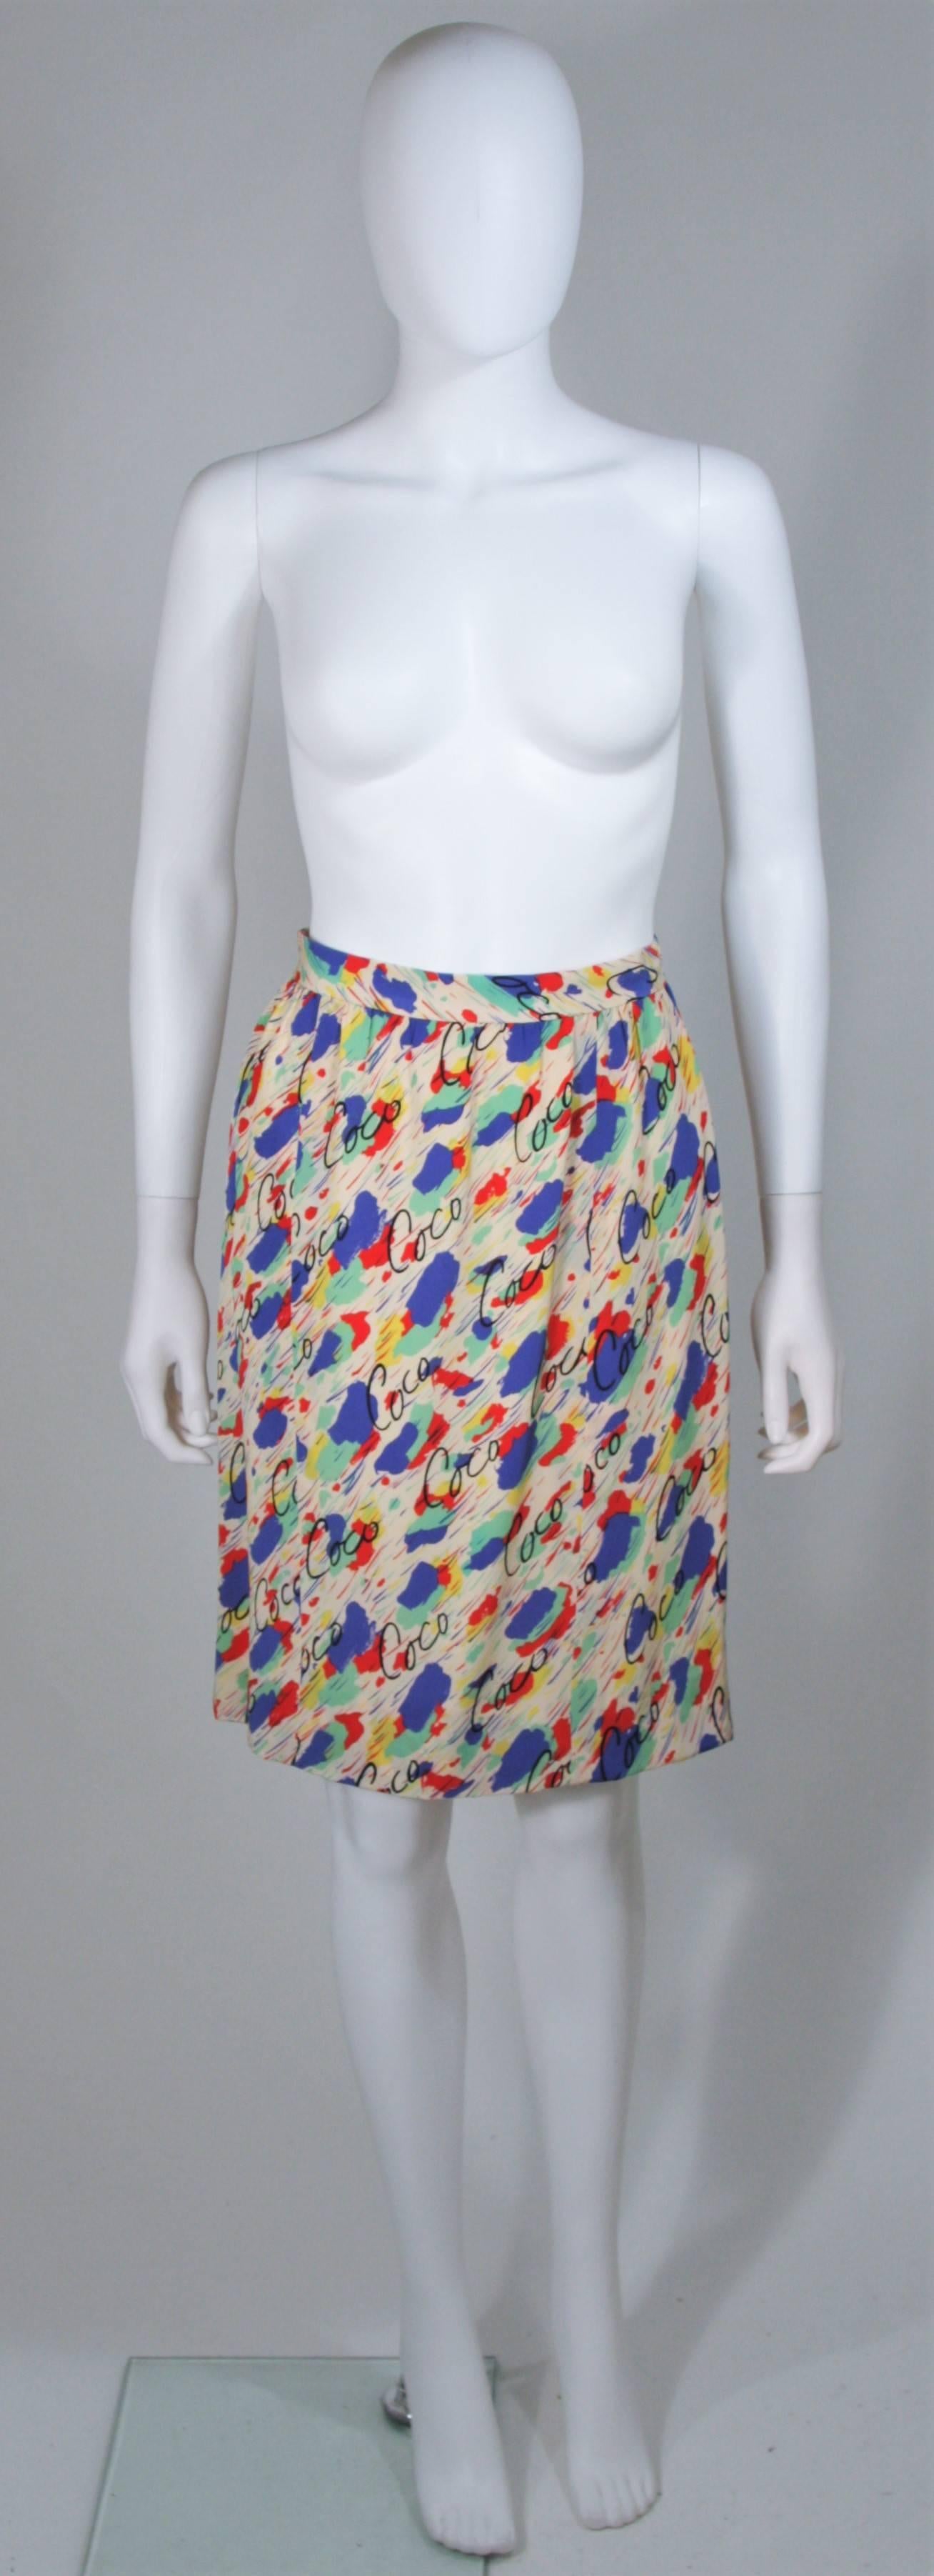 CHANEL BOUTIQUE Silk Abstract COCO Print Skirt and Blouse Set Size 4-6 4